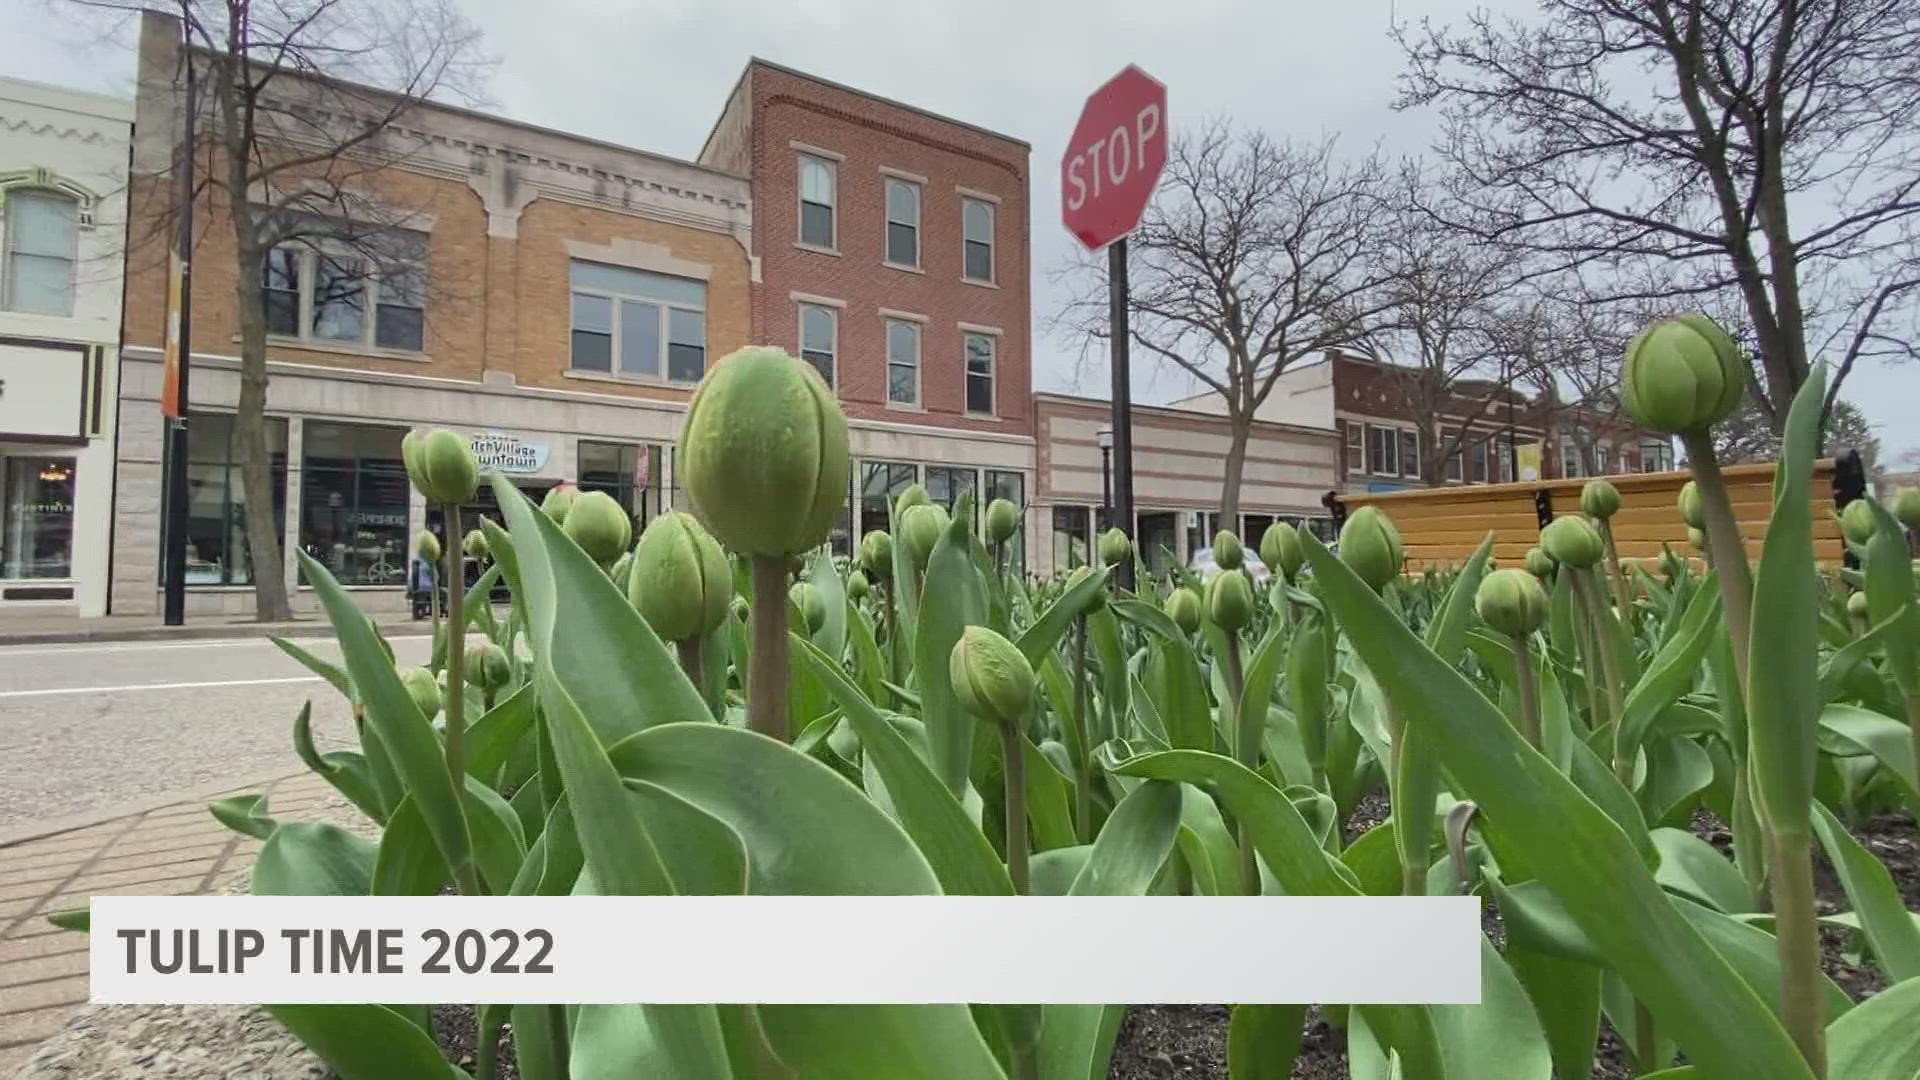 Here's what you can expect from Tulip Time in Holland, Michigan this year.